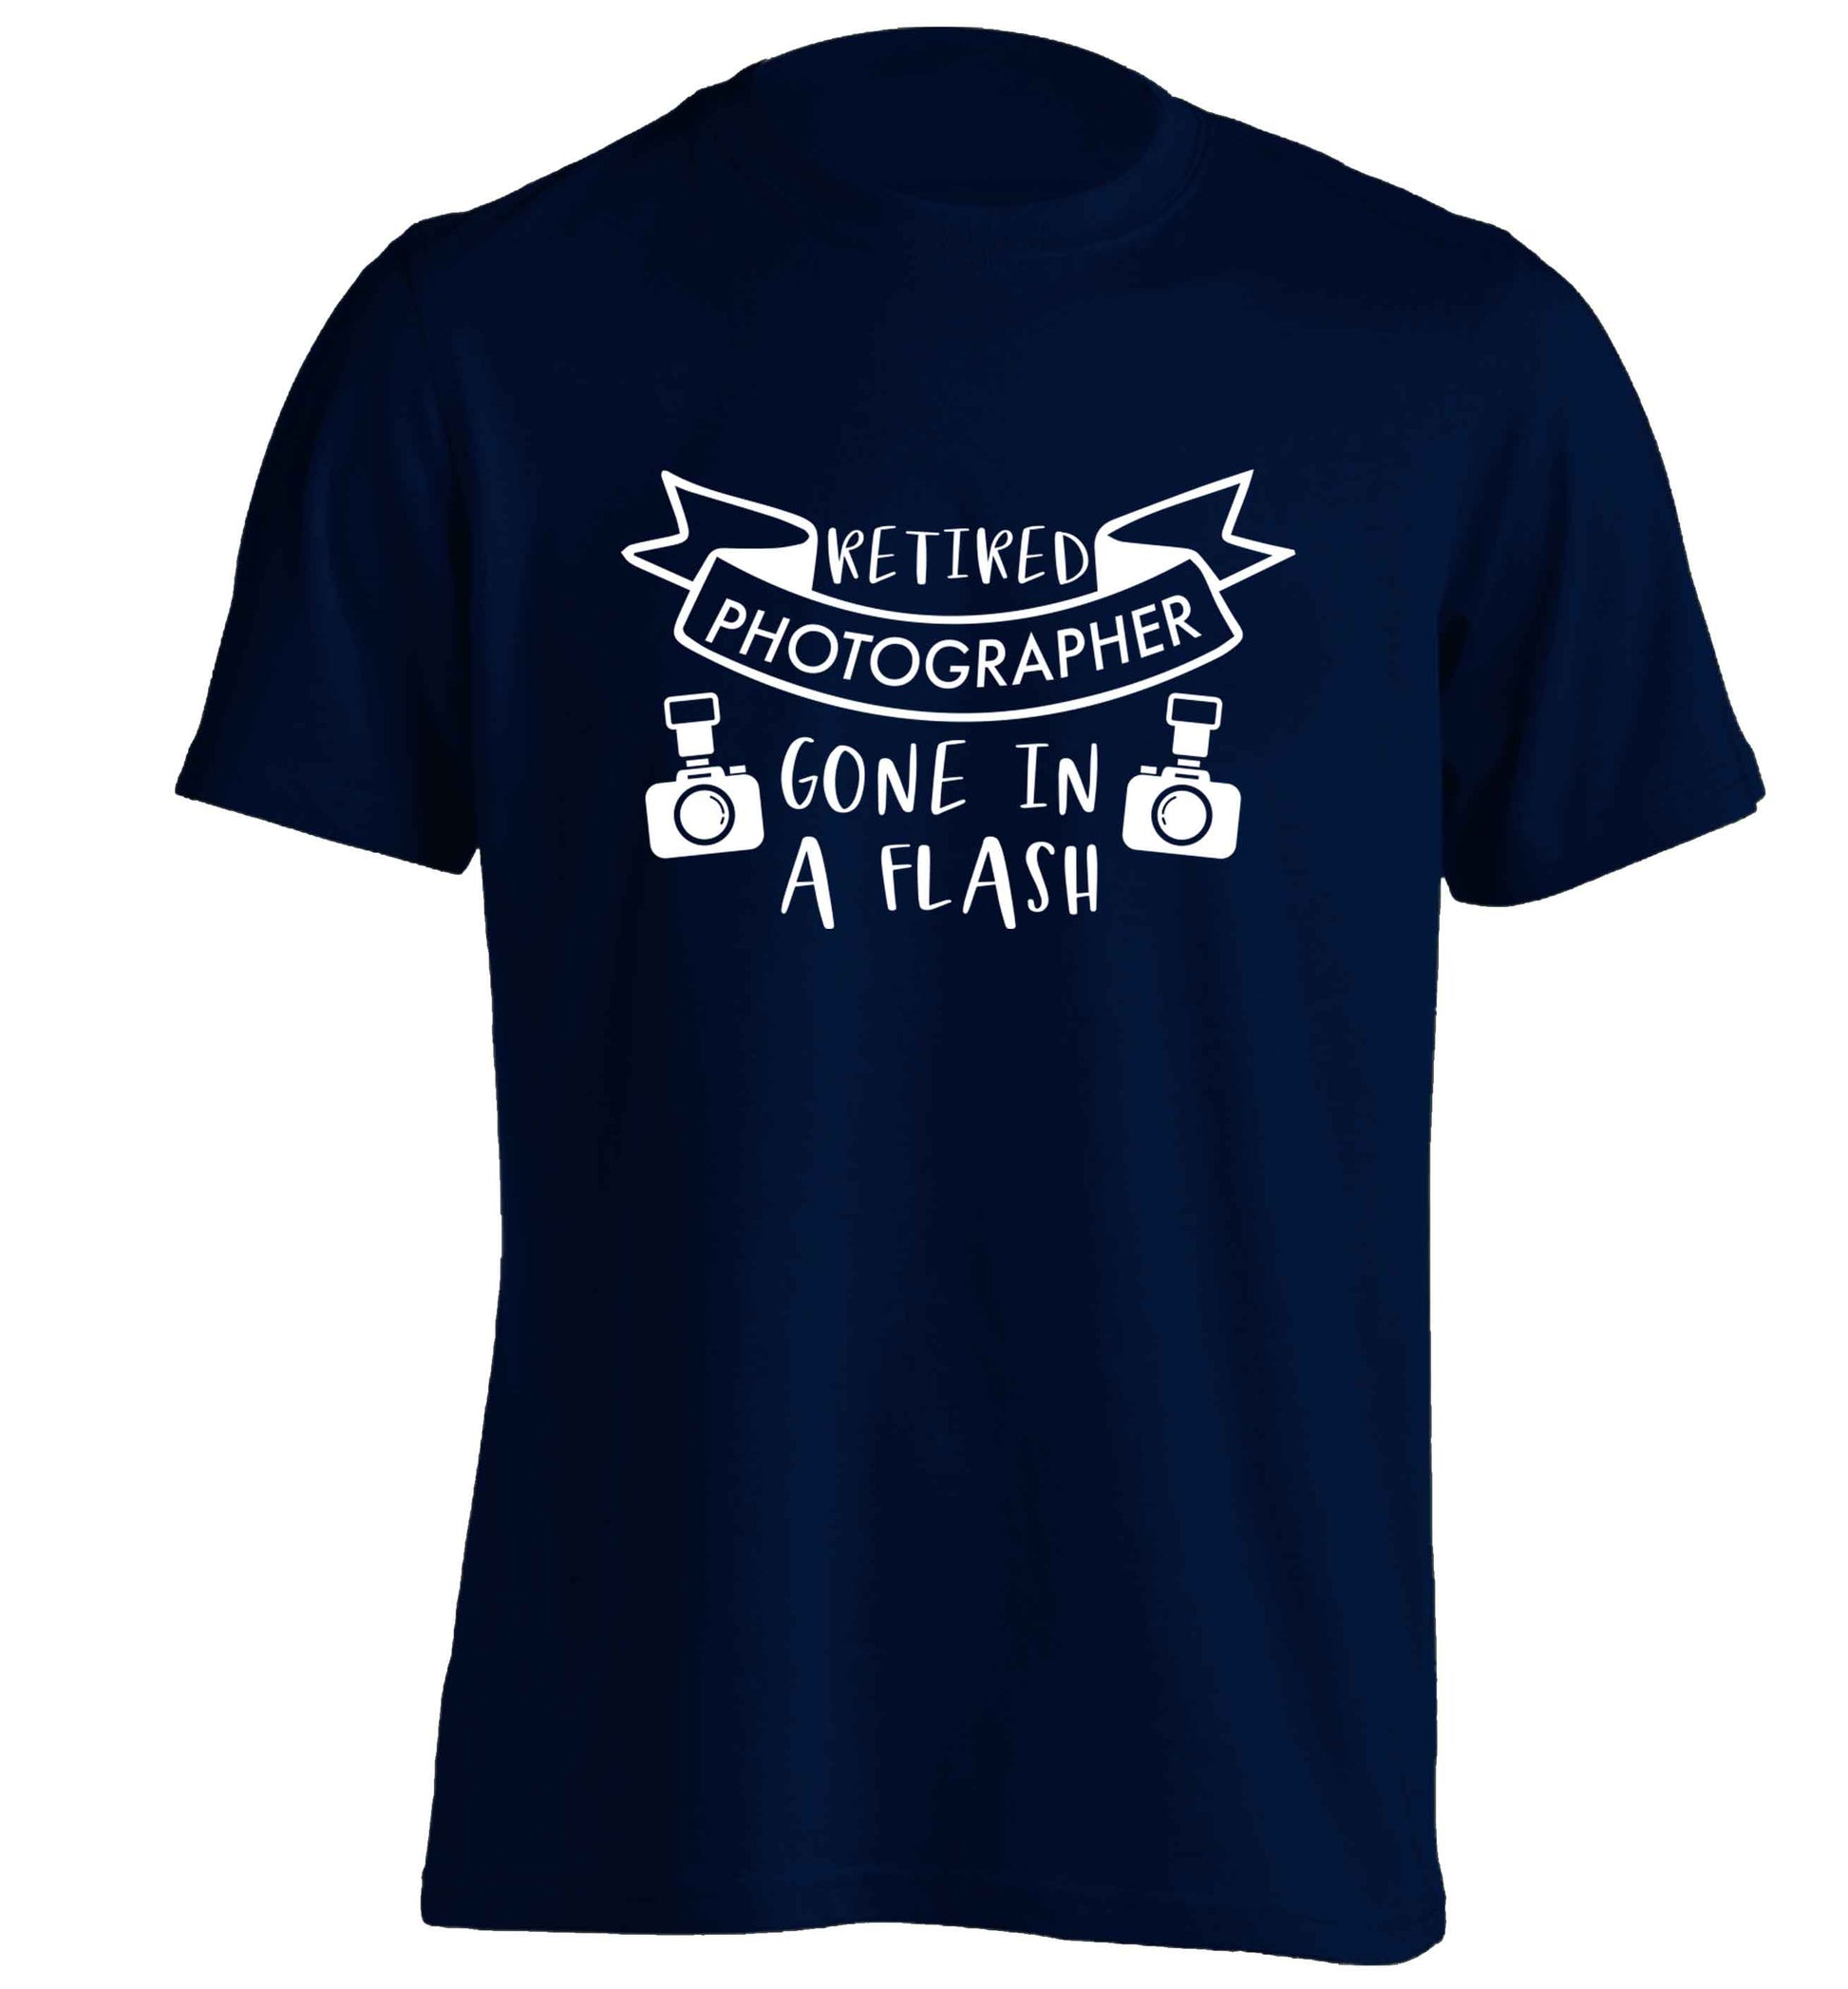 Retired photographer gone in a flash adults unisex navy Tshirt 2XL